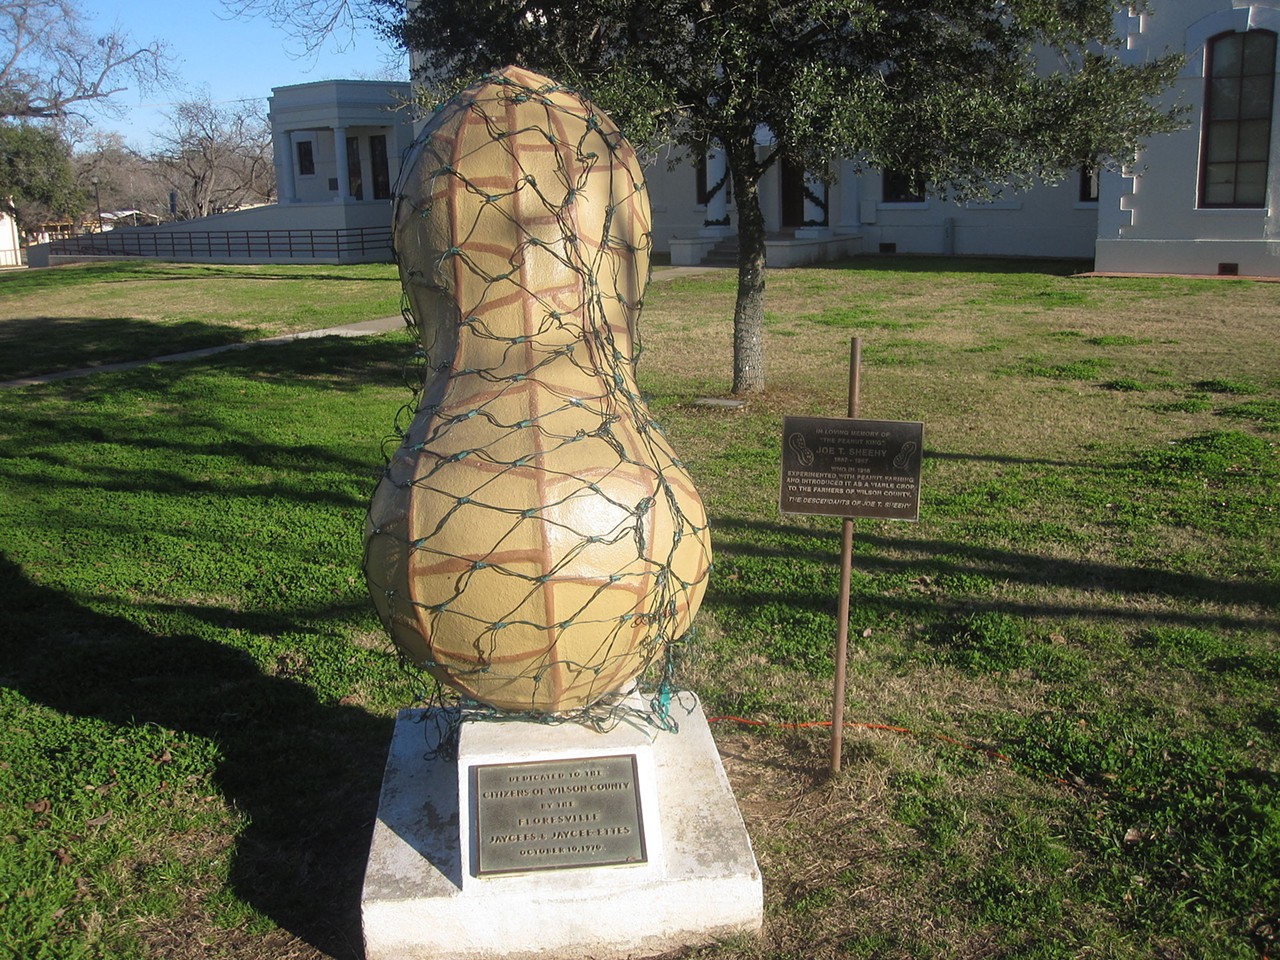 Big Peanut for The Peanut King, Floresville, TX
1420 3rd St., Floresville, roadsideamerica.com
A giant peanut statue dons the Floresville courthouse’s lawn in honor of Joe T. Sheehy, AKA "The Peanut King.” This oversized legume is believed to be “the oldest of America's big civic peanuts.”
Photo via Wikimedia Commons /  Billy Hathorn